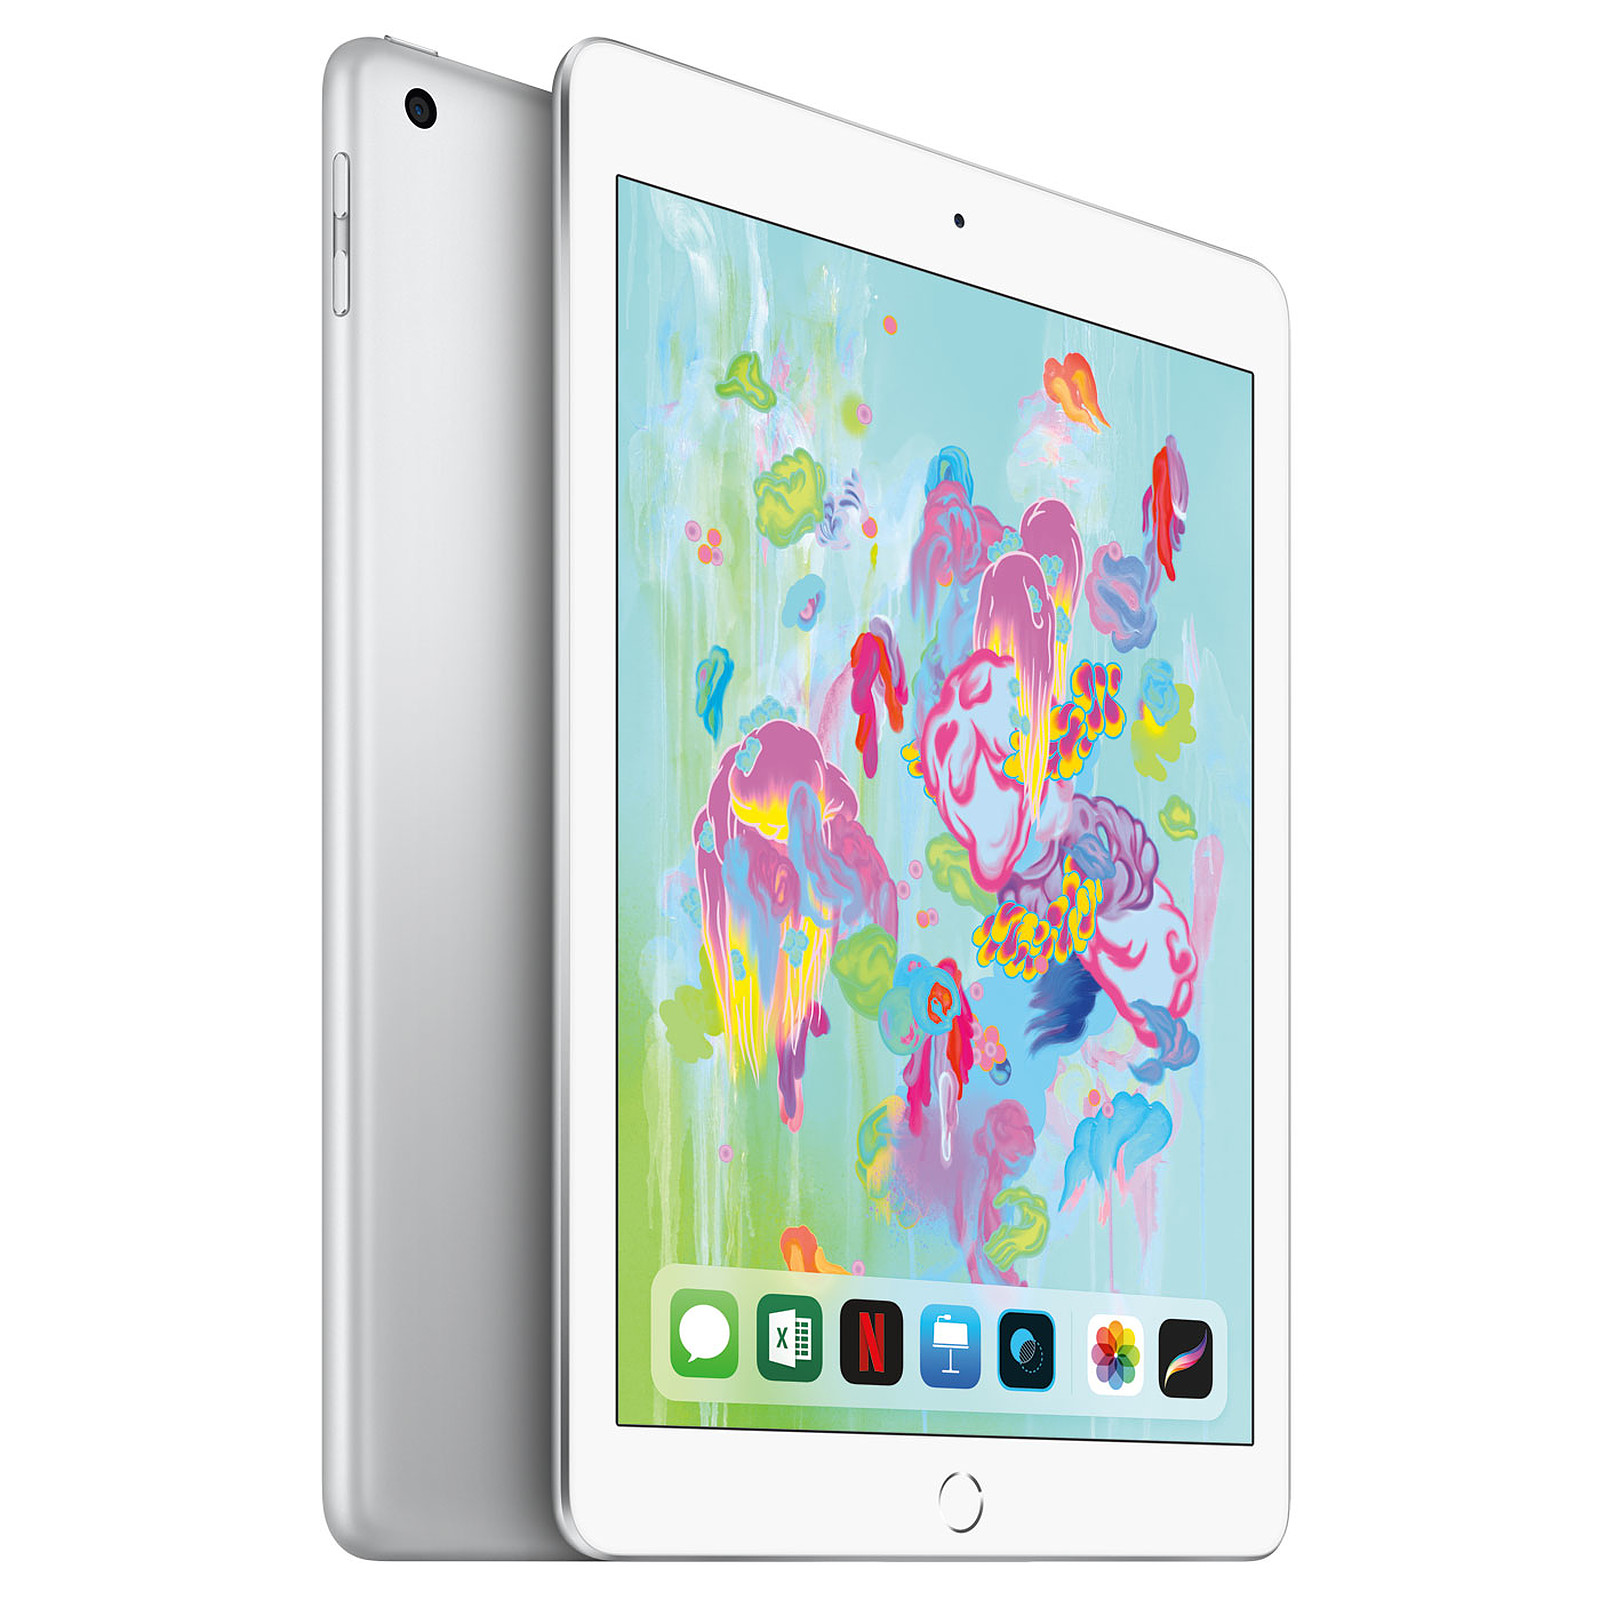 Apple iPad (2018) Wi-Fi 32 GB Wi-Fi Argent · Reconditionne - Tablette tactile Apple